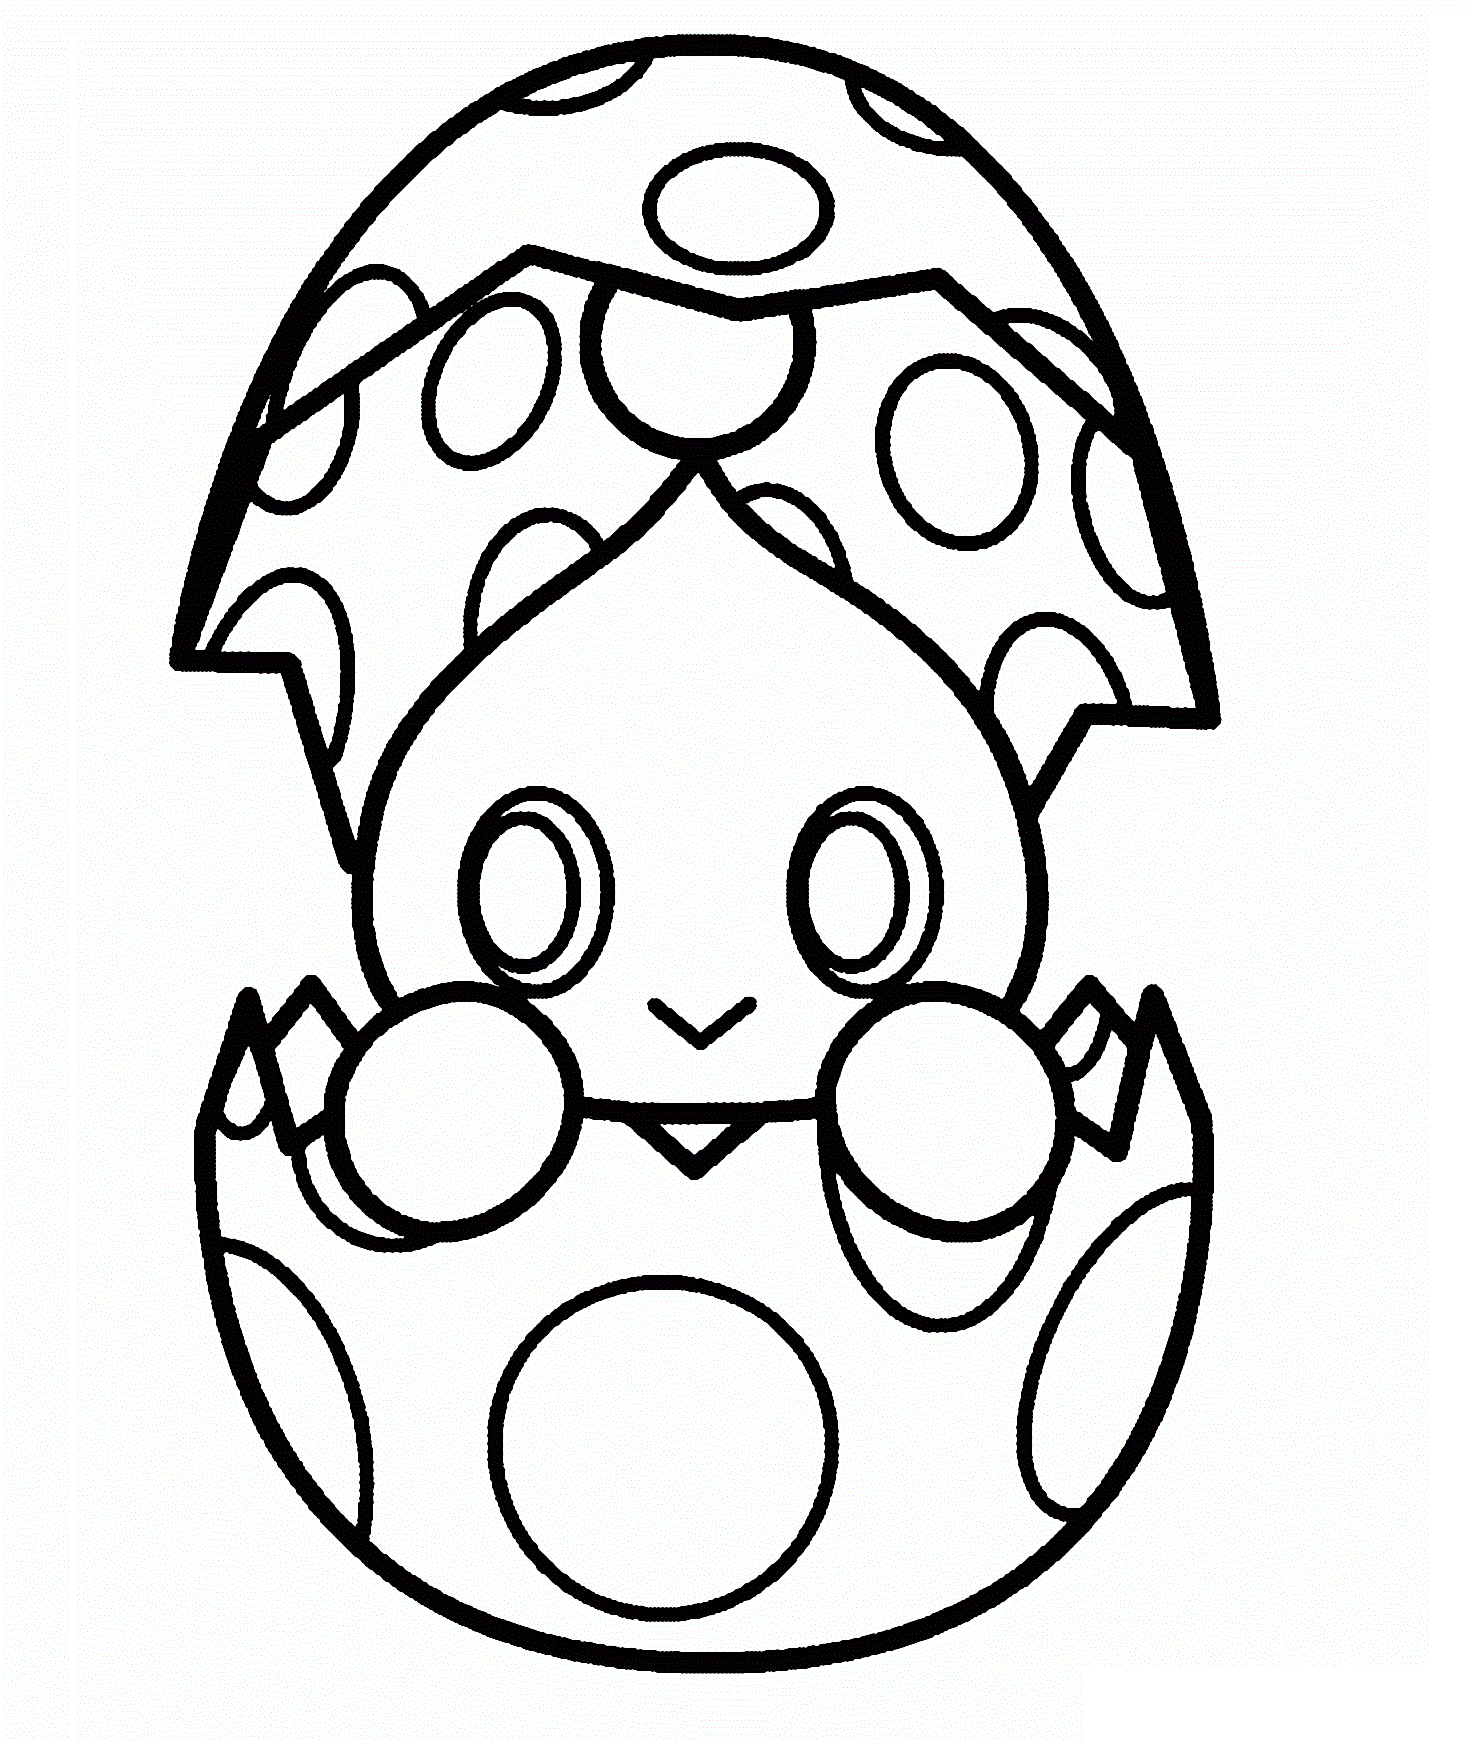 Dark Chao, evil mascot of Sonic coloring page printable game